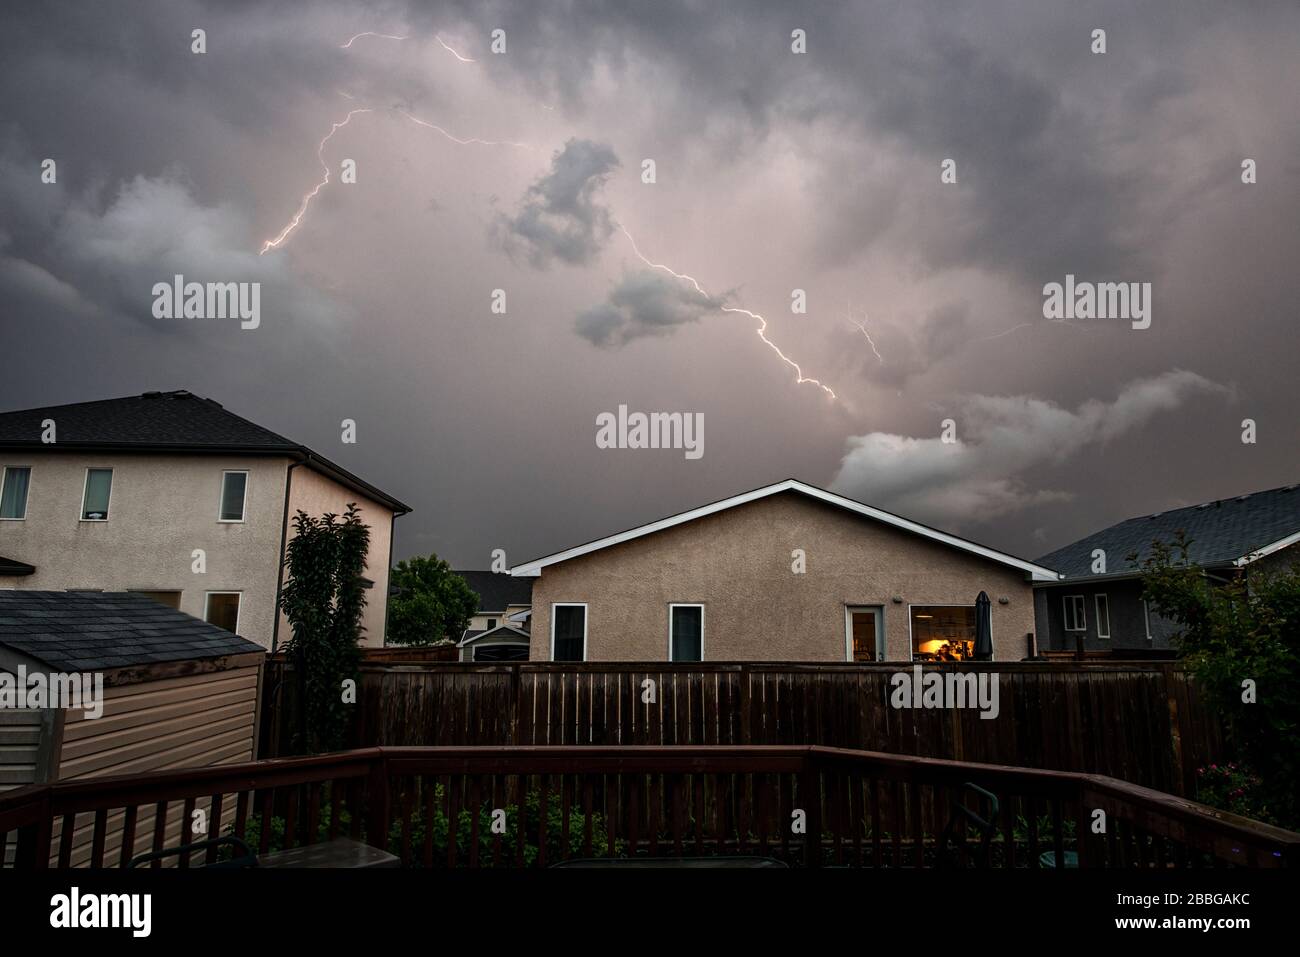 Storm with lightning flashes over houses in my backyard in Winnipeg, Manitoba, Canada Stock Photo